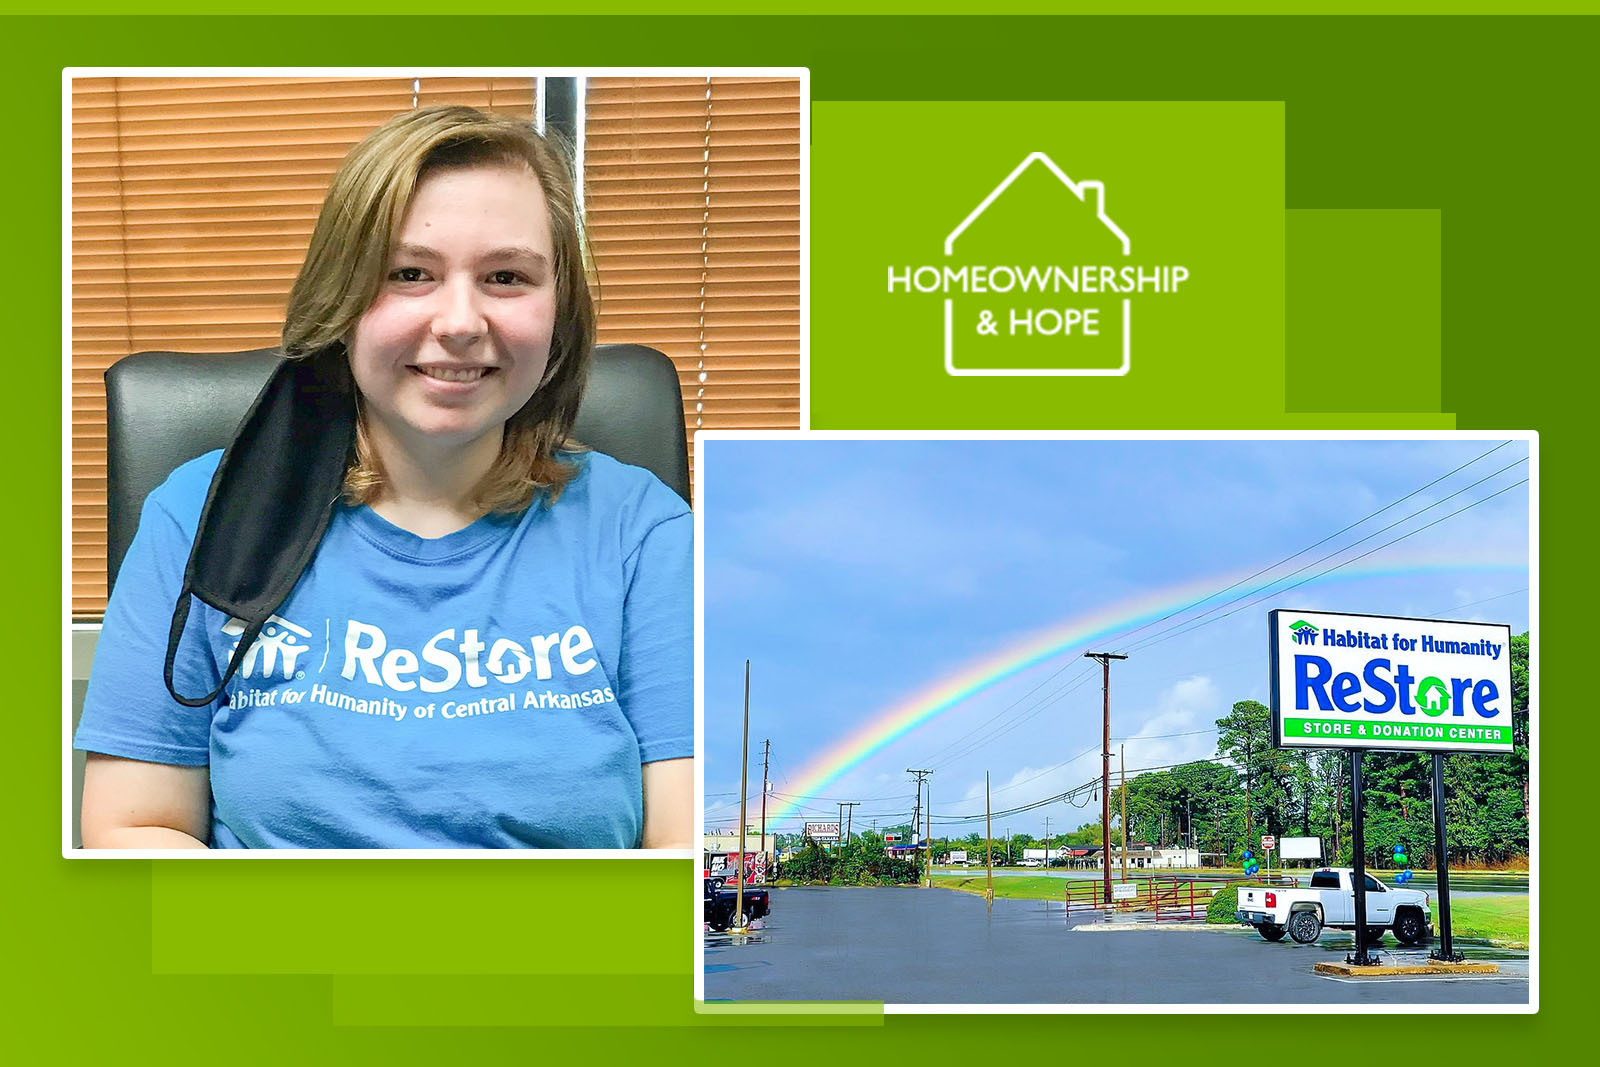 Photos of Emma Bowen and the Little Rock Restore location...